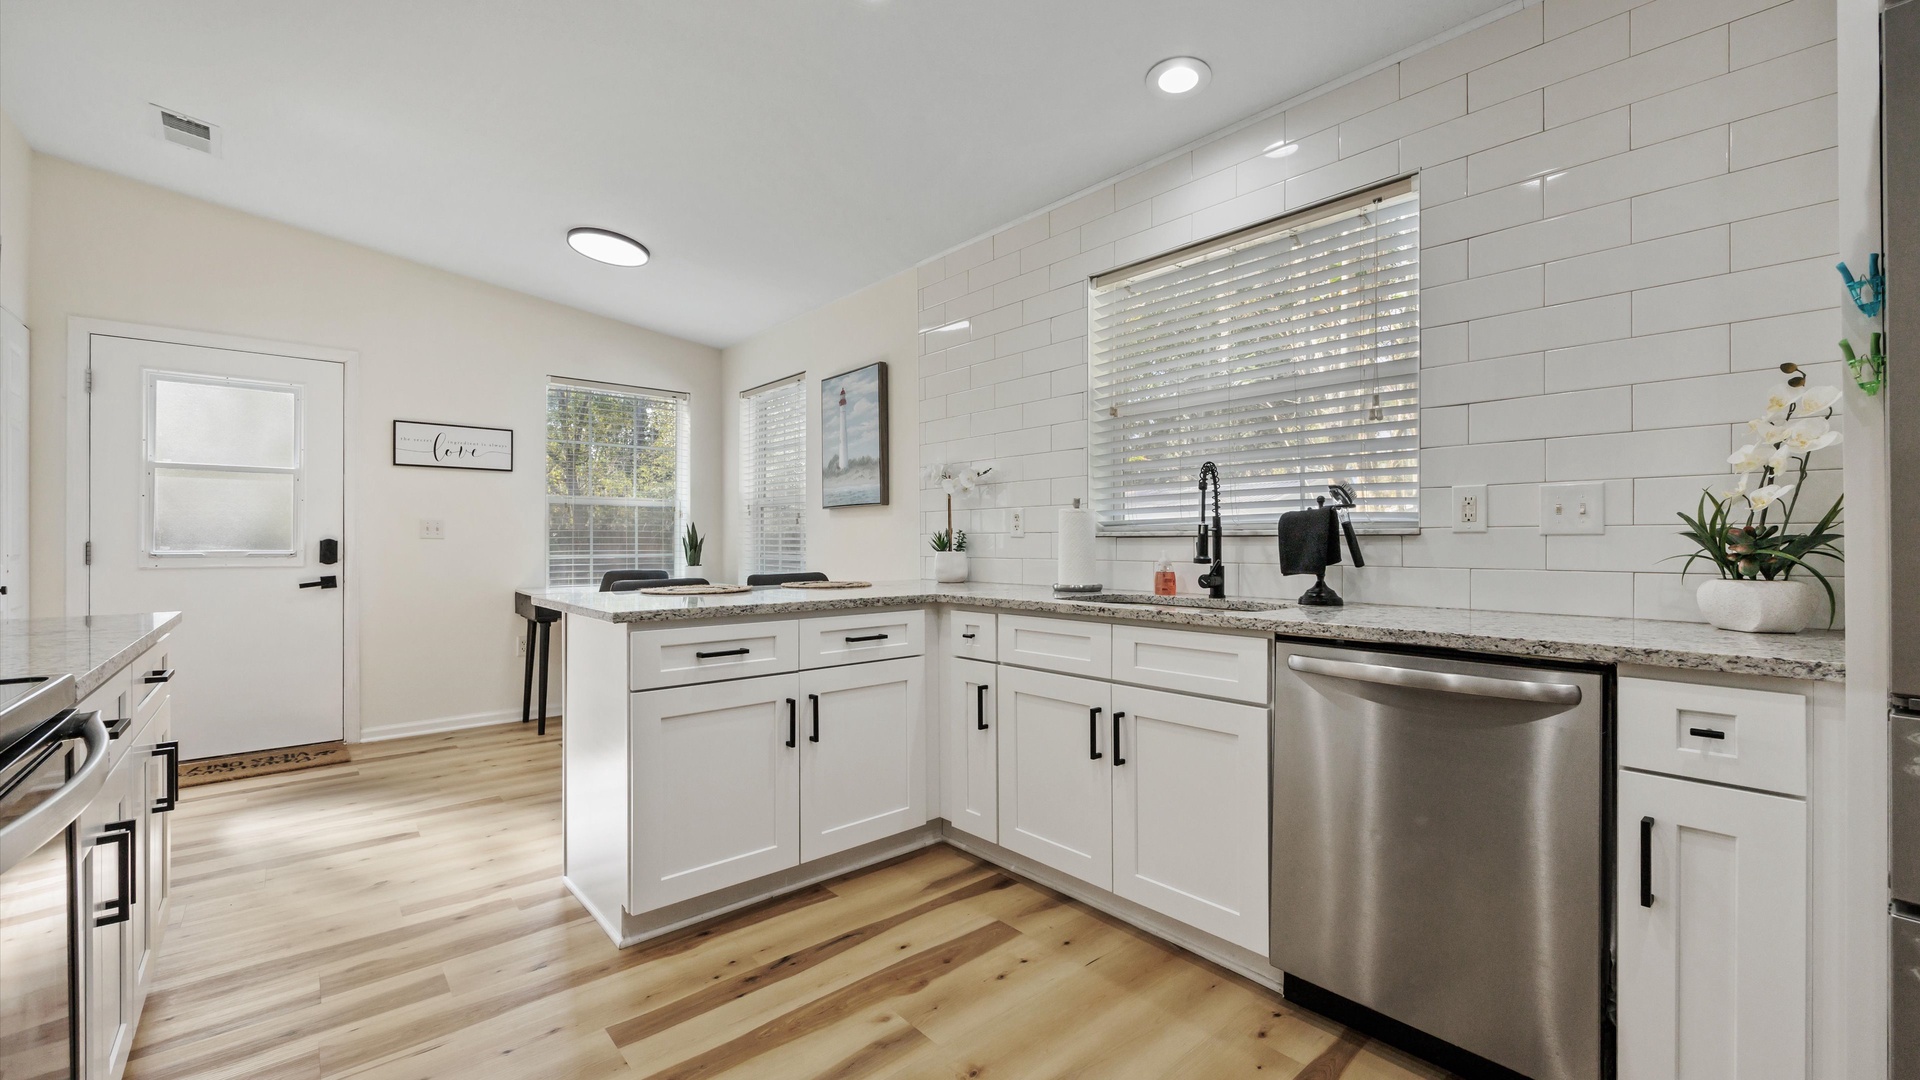 The airy, updated kitchen offers ample space & all the comforts of home